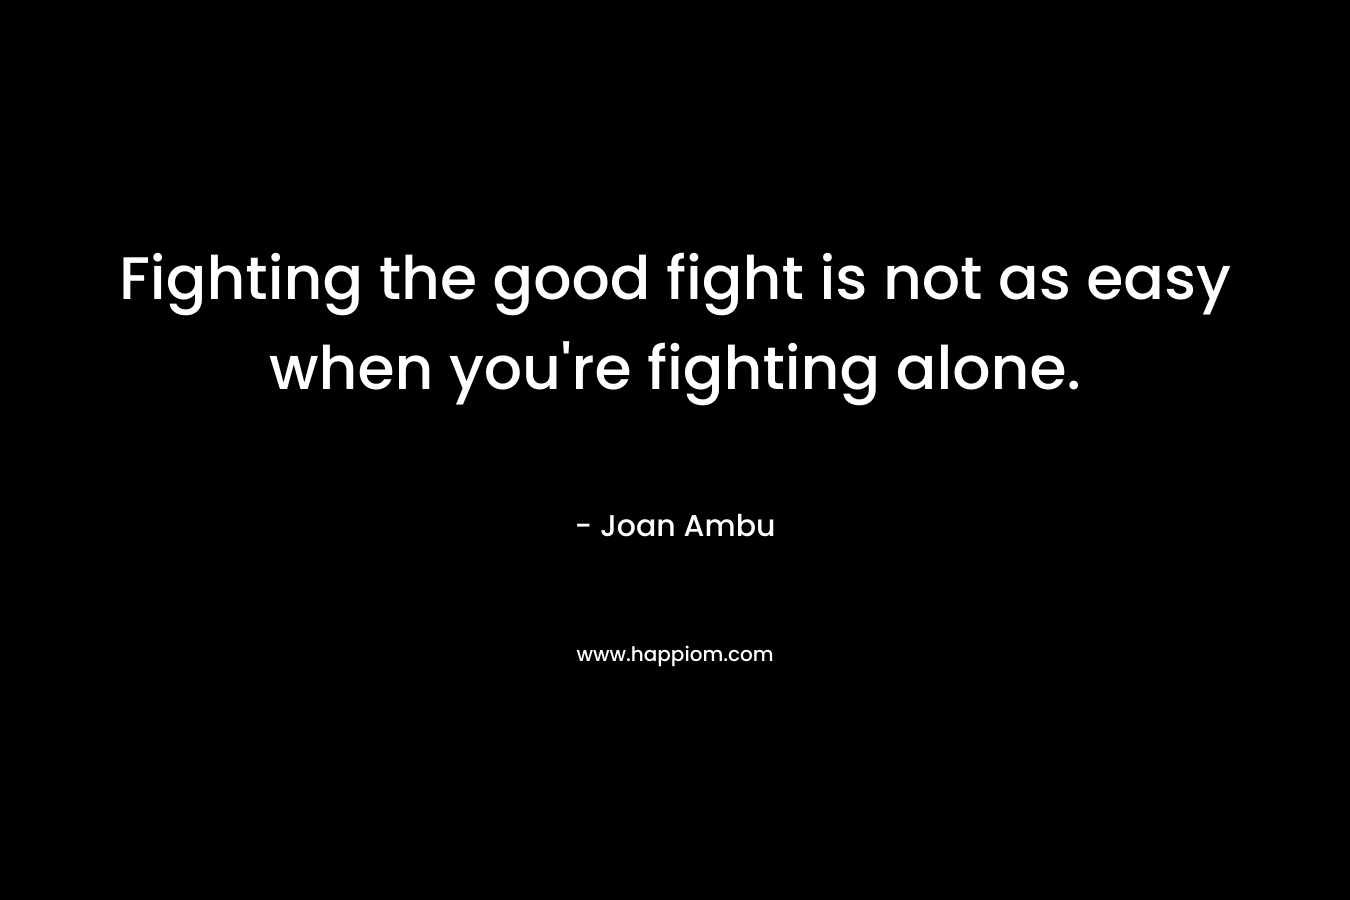 Fighting the good fight is not as easy when you're fighting alone.